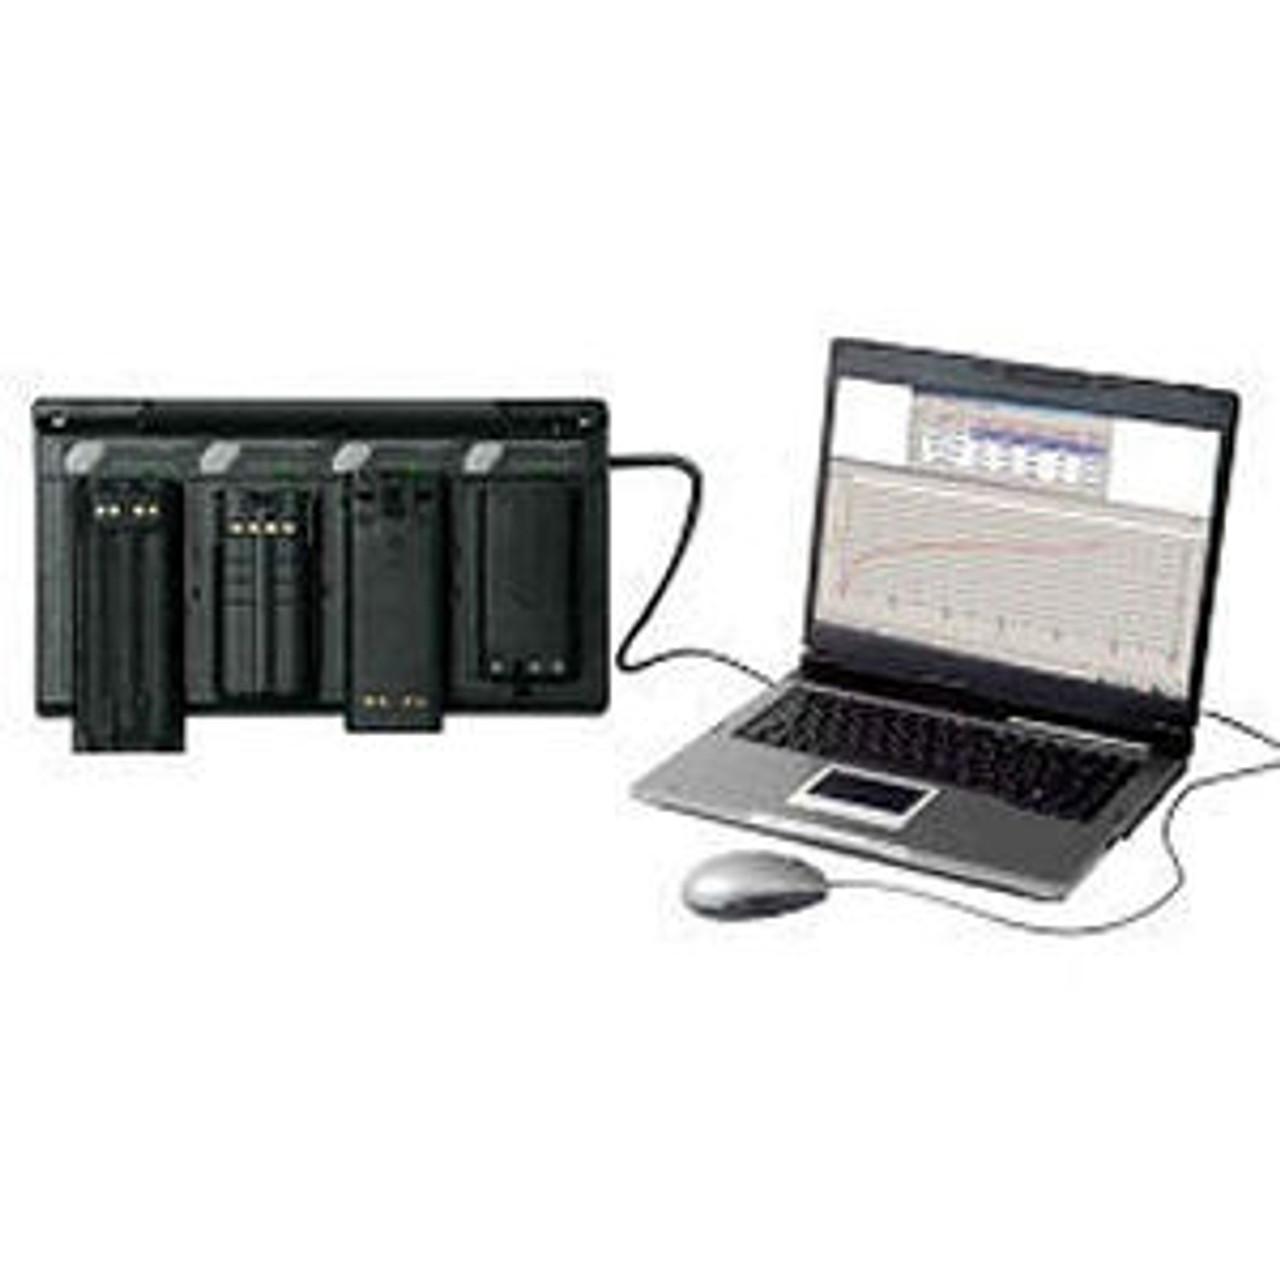 AdvanceTec 4-Slot Software Driven Monitoring System For ICOM IC-F11 Batteries